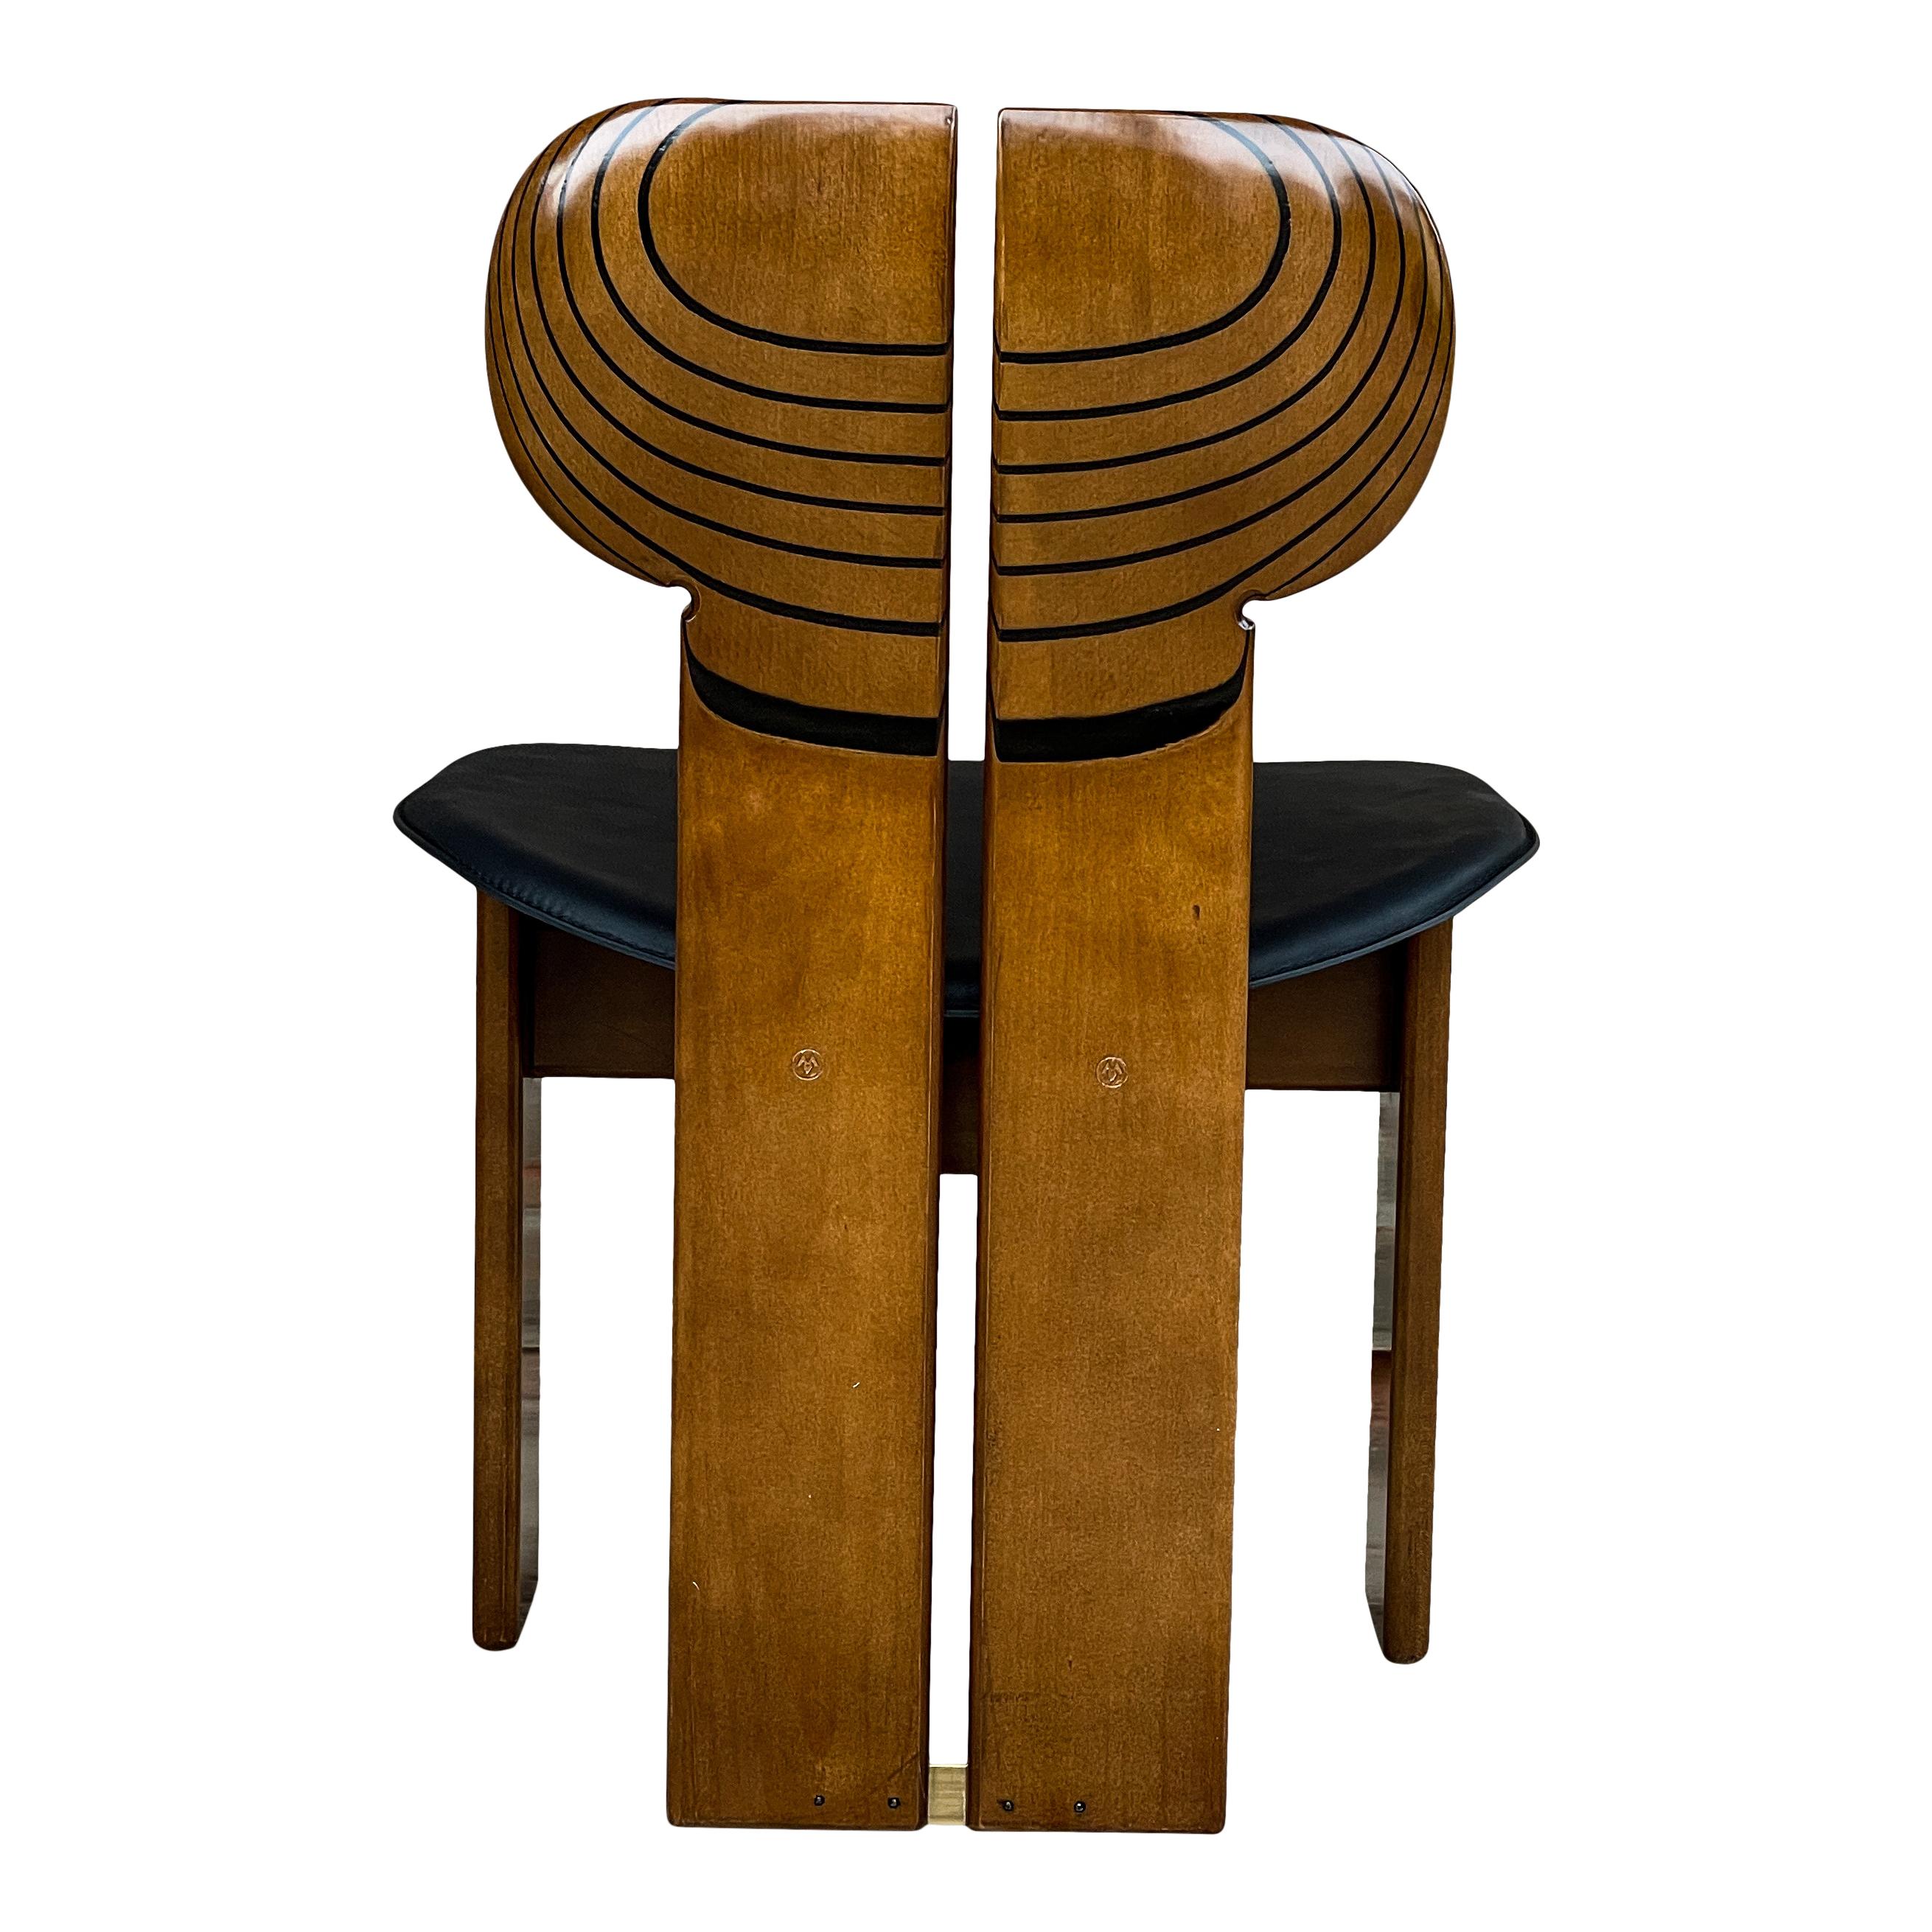 Afra and Tobia Scarpa Walnut Africa Dining Chair for Maxalto, 1976, Set of 6 For Sale 4